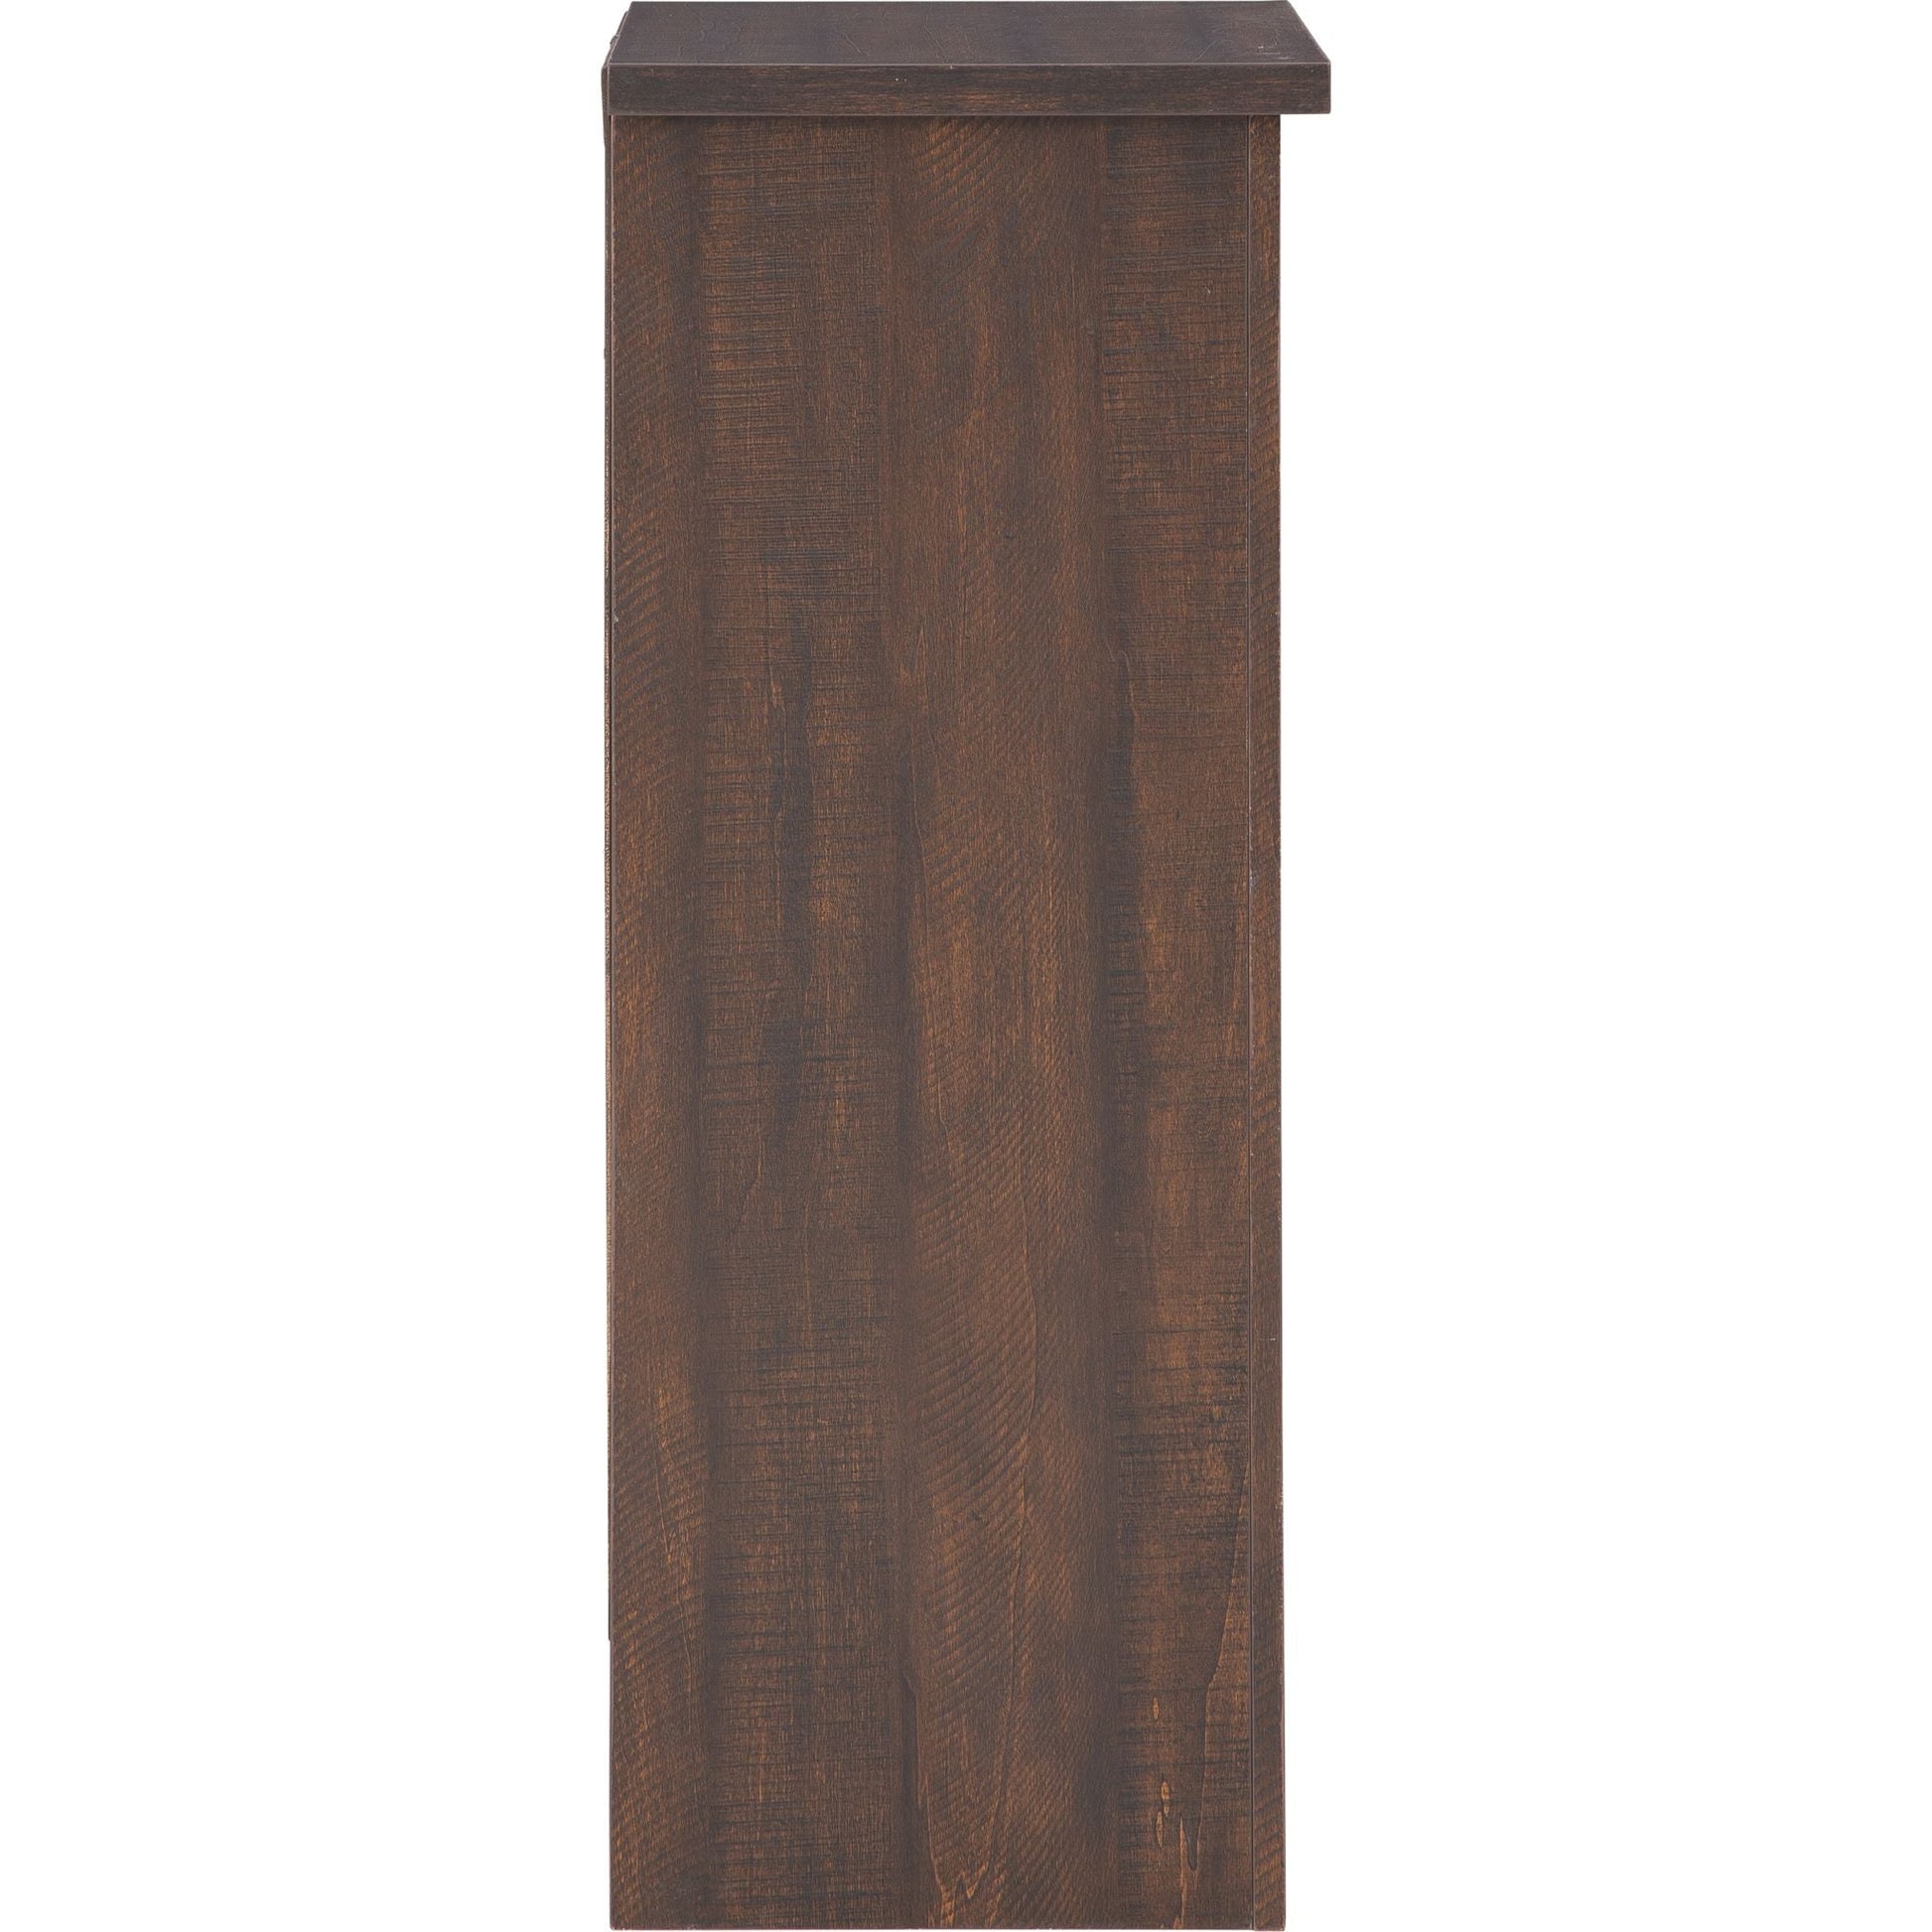 Turnley Wine Cabinet - Brown